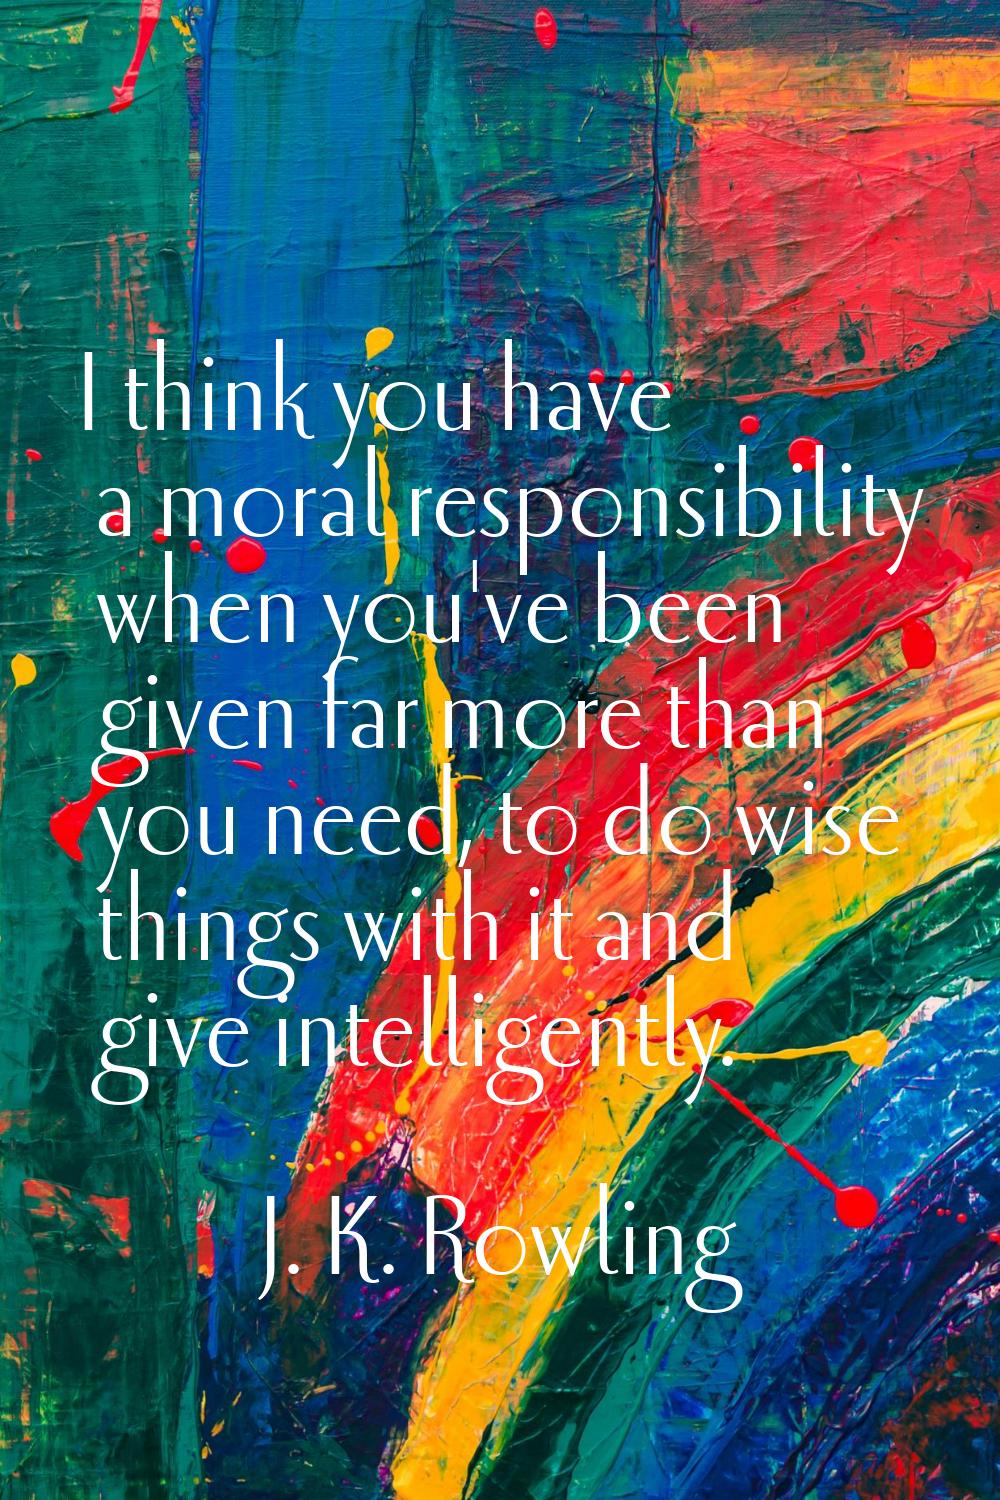 I think you have a moral responsibility when you've been given far more than you need, to do wise t